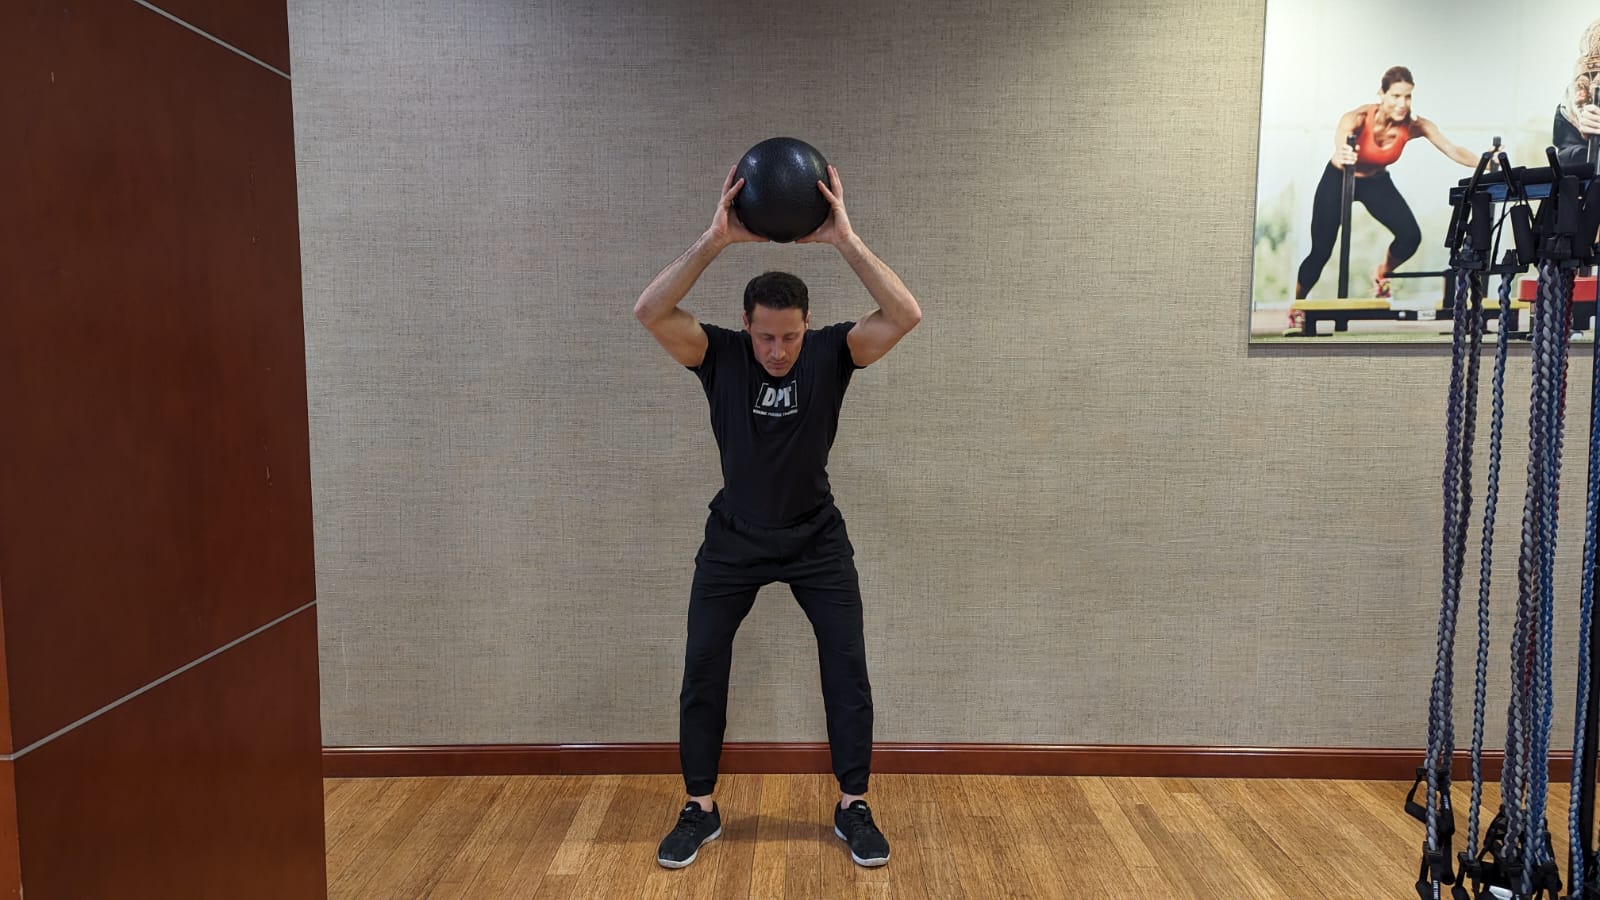 fit personal trainer does an overhead slam ball exercise